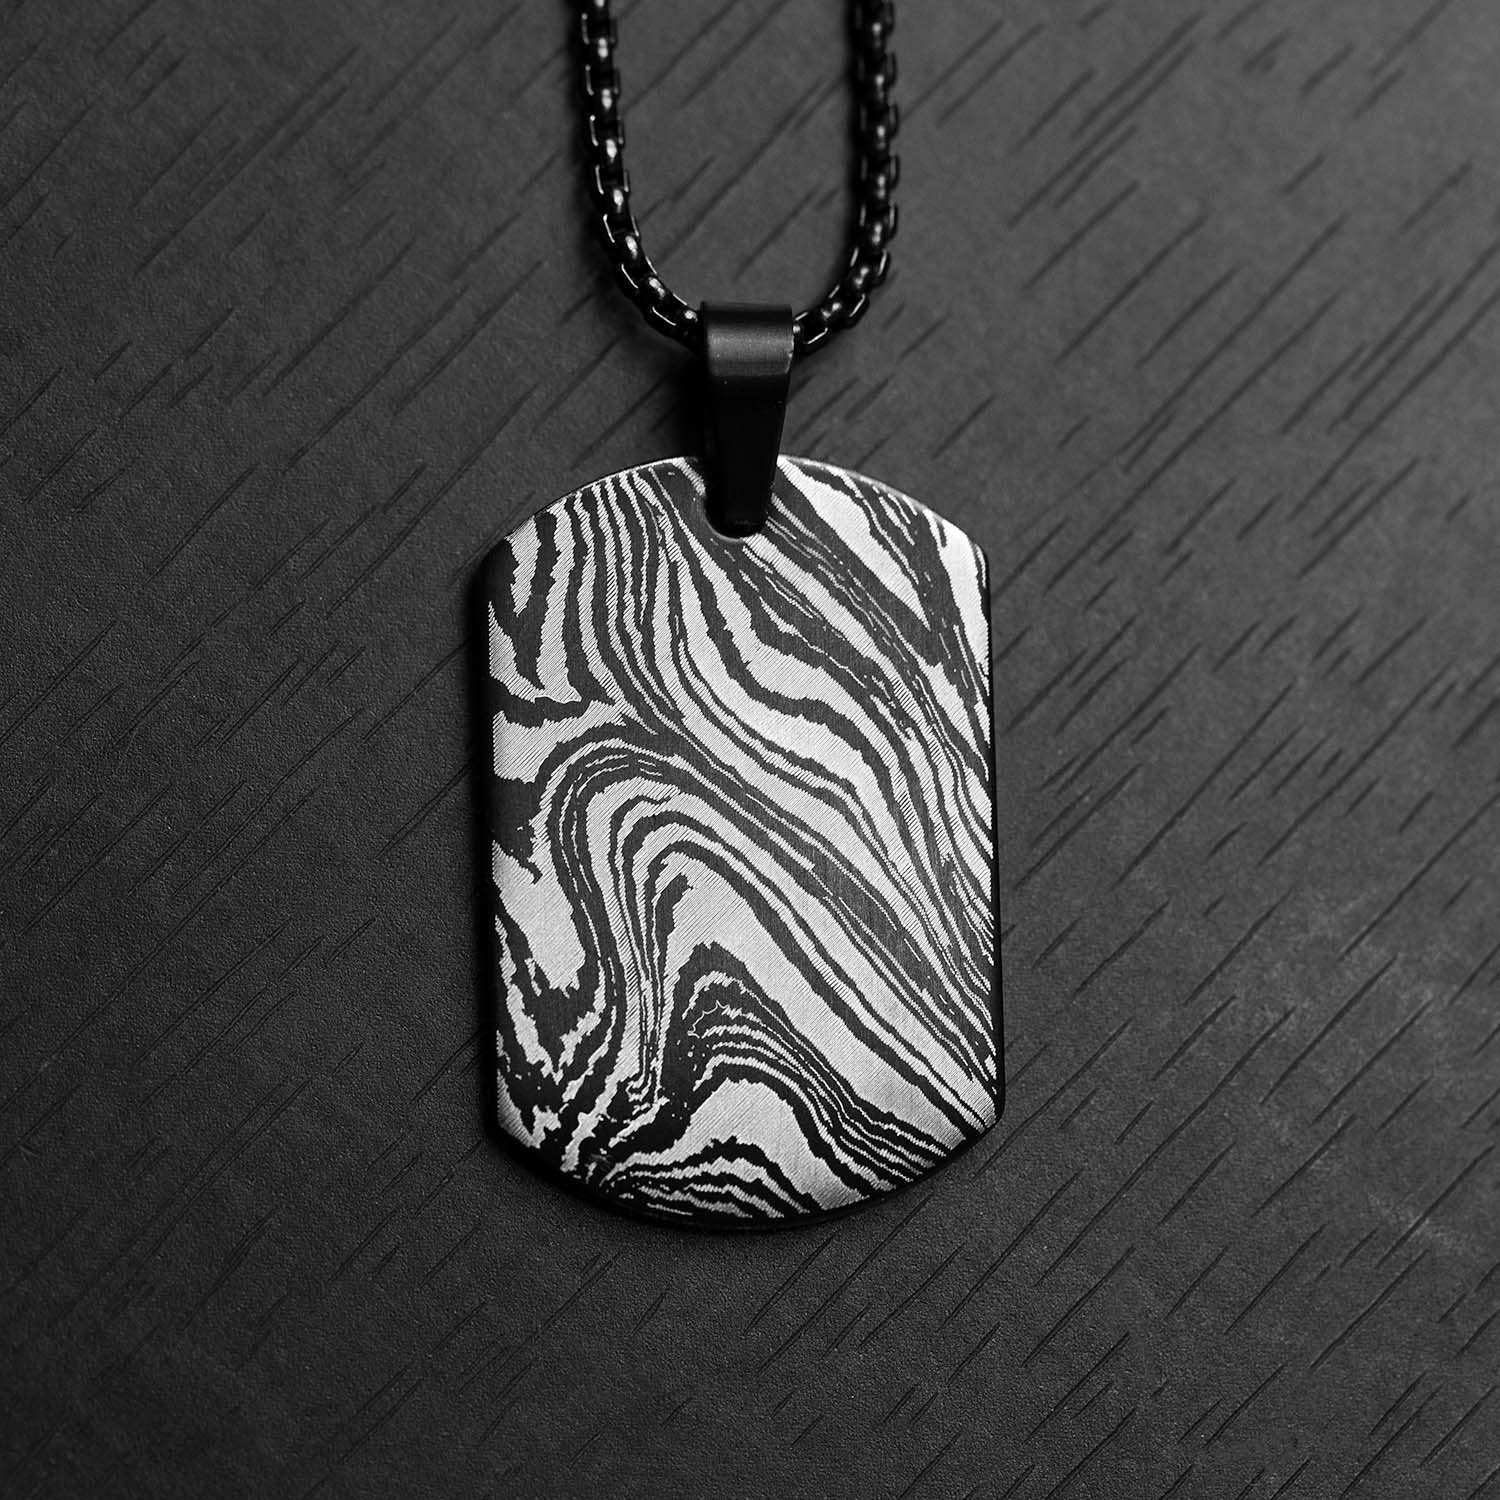 Damascus Steel Army Dog Tag Necklace Black